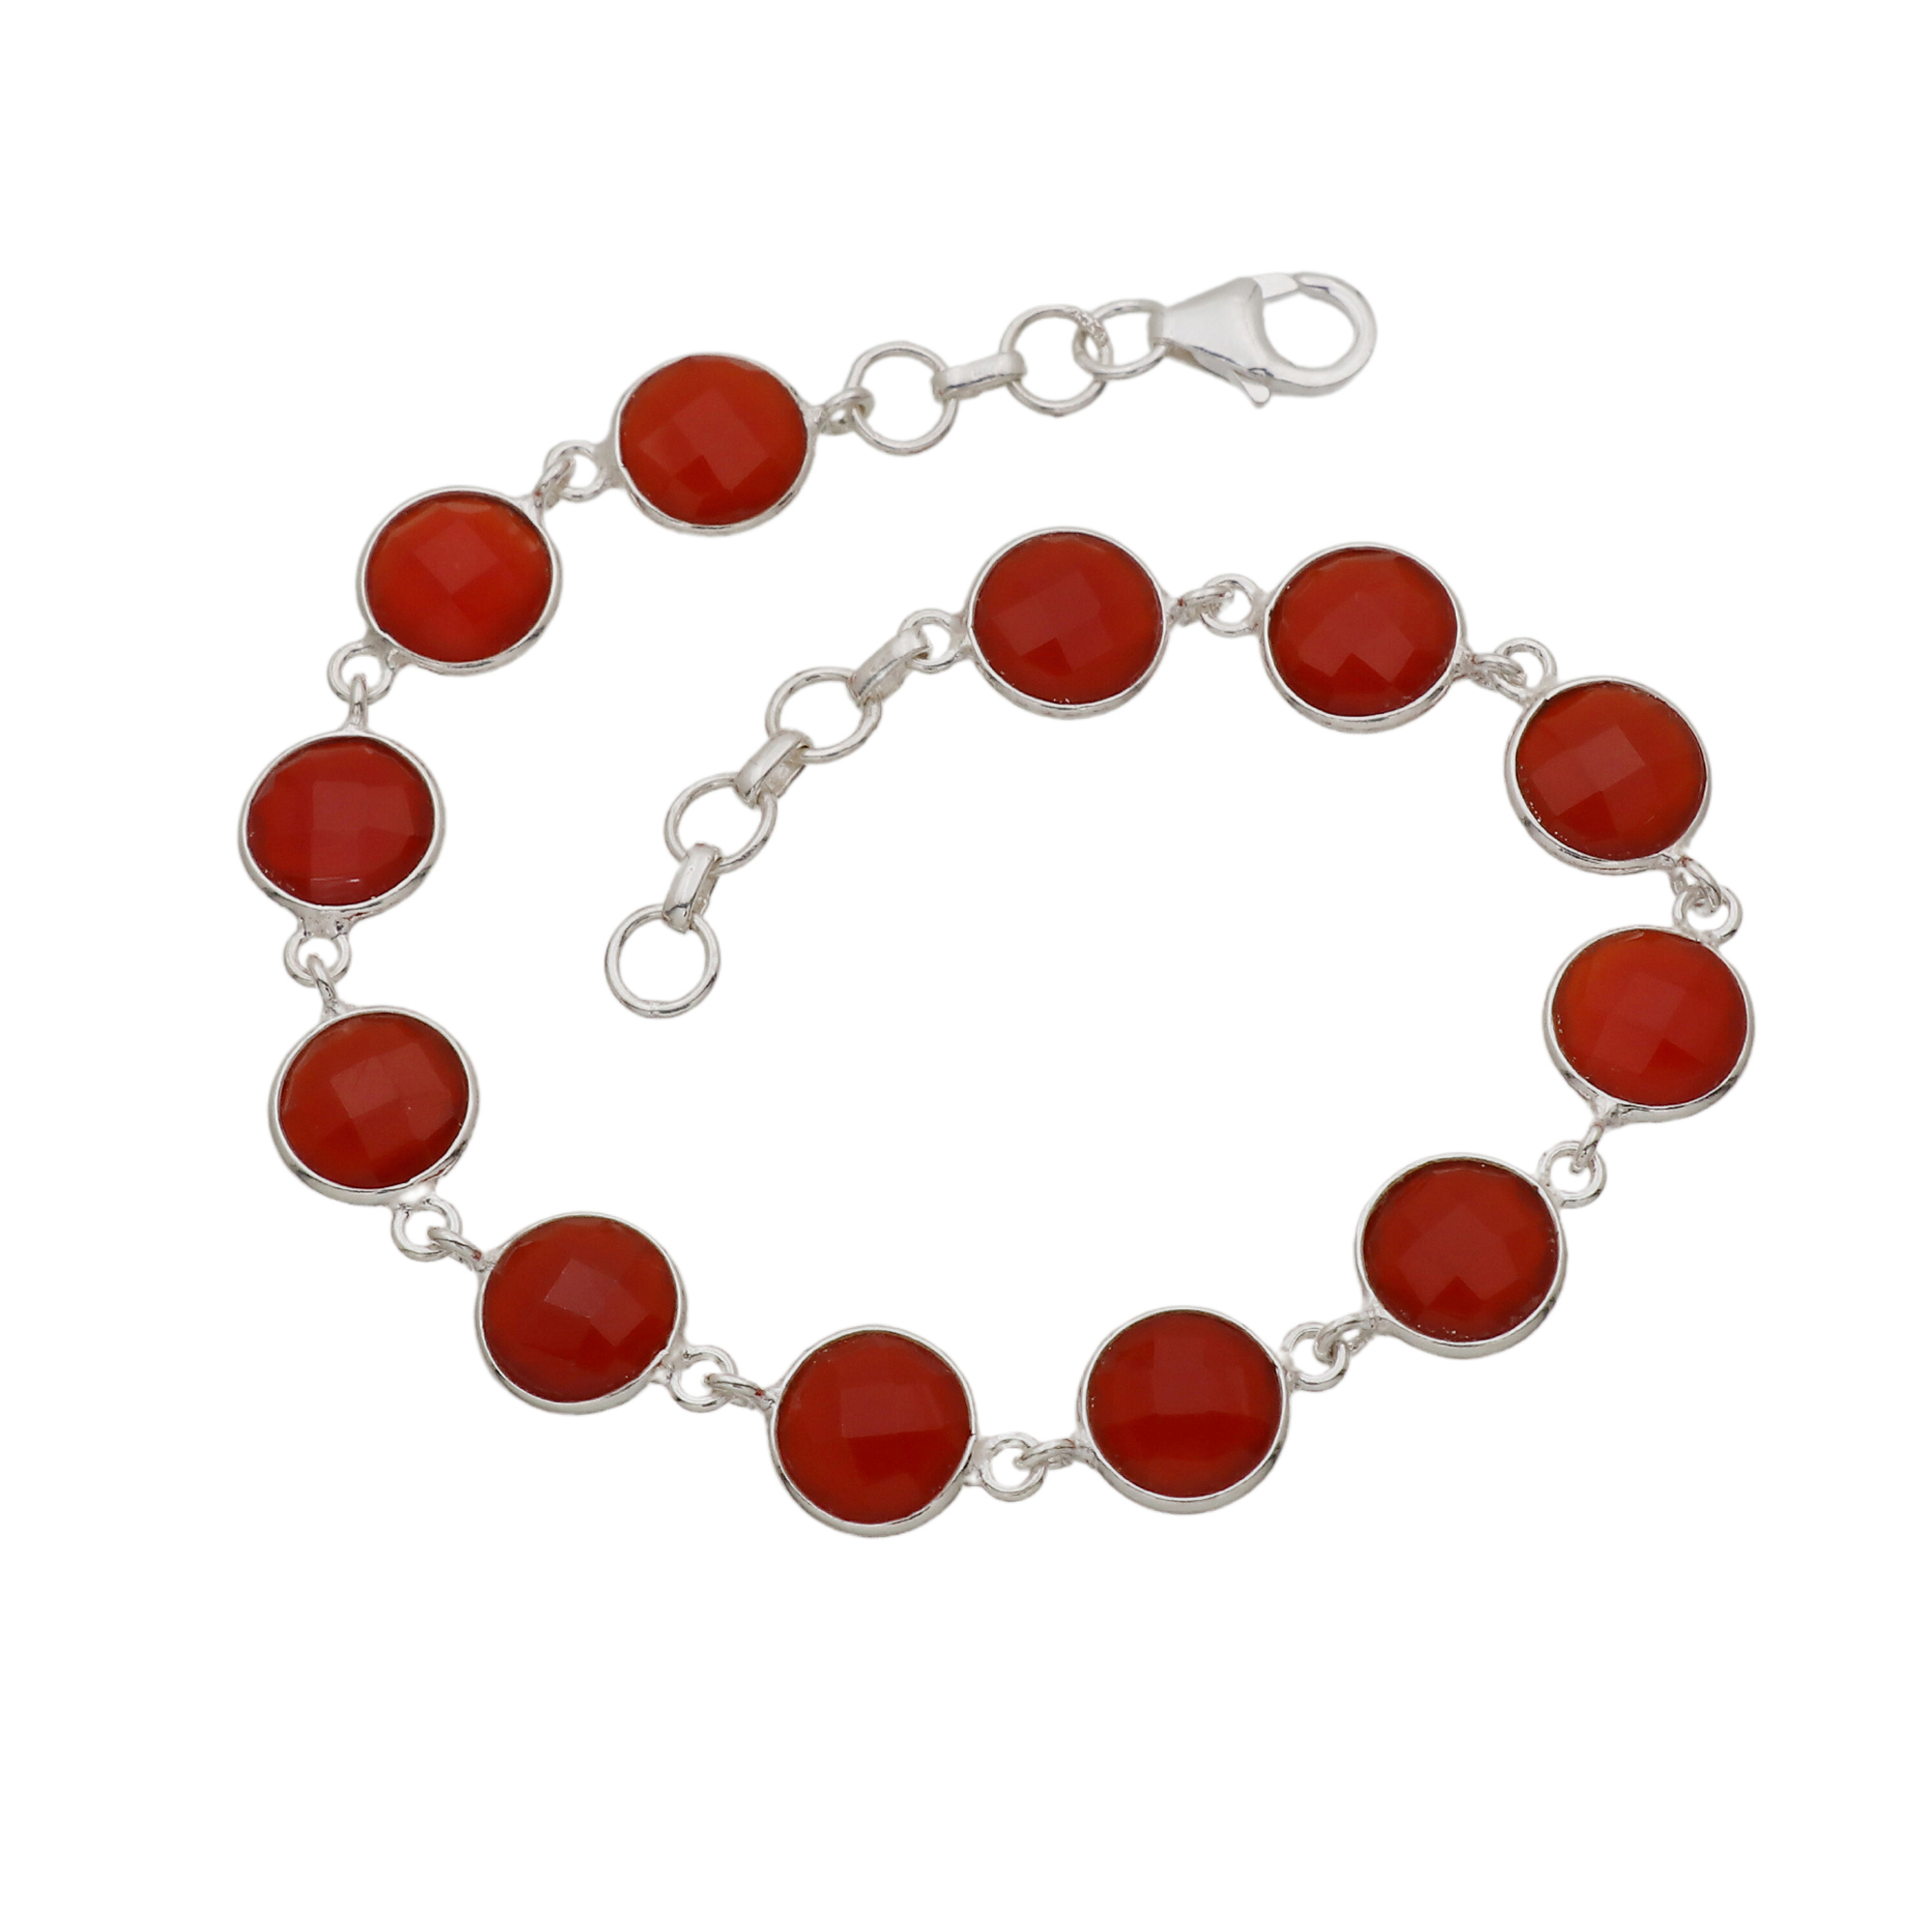 RED MINIMAL KDM GOLD BRACELET POLA BADHANO 1 PIECE APPROX WGT: 0.500 GM FOR  WOMEN.